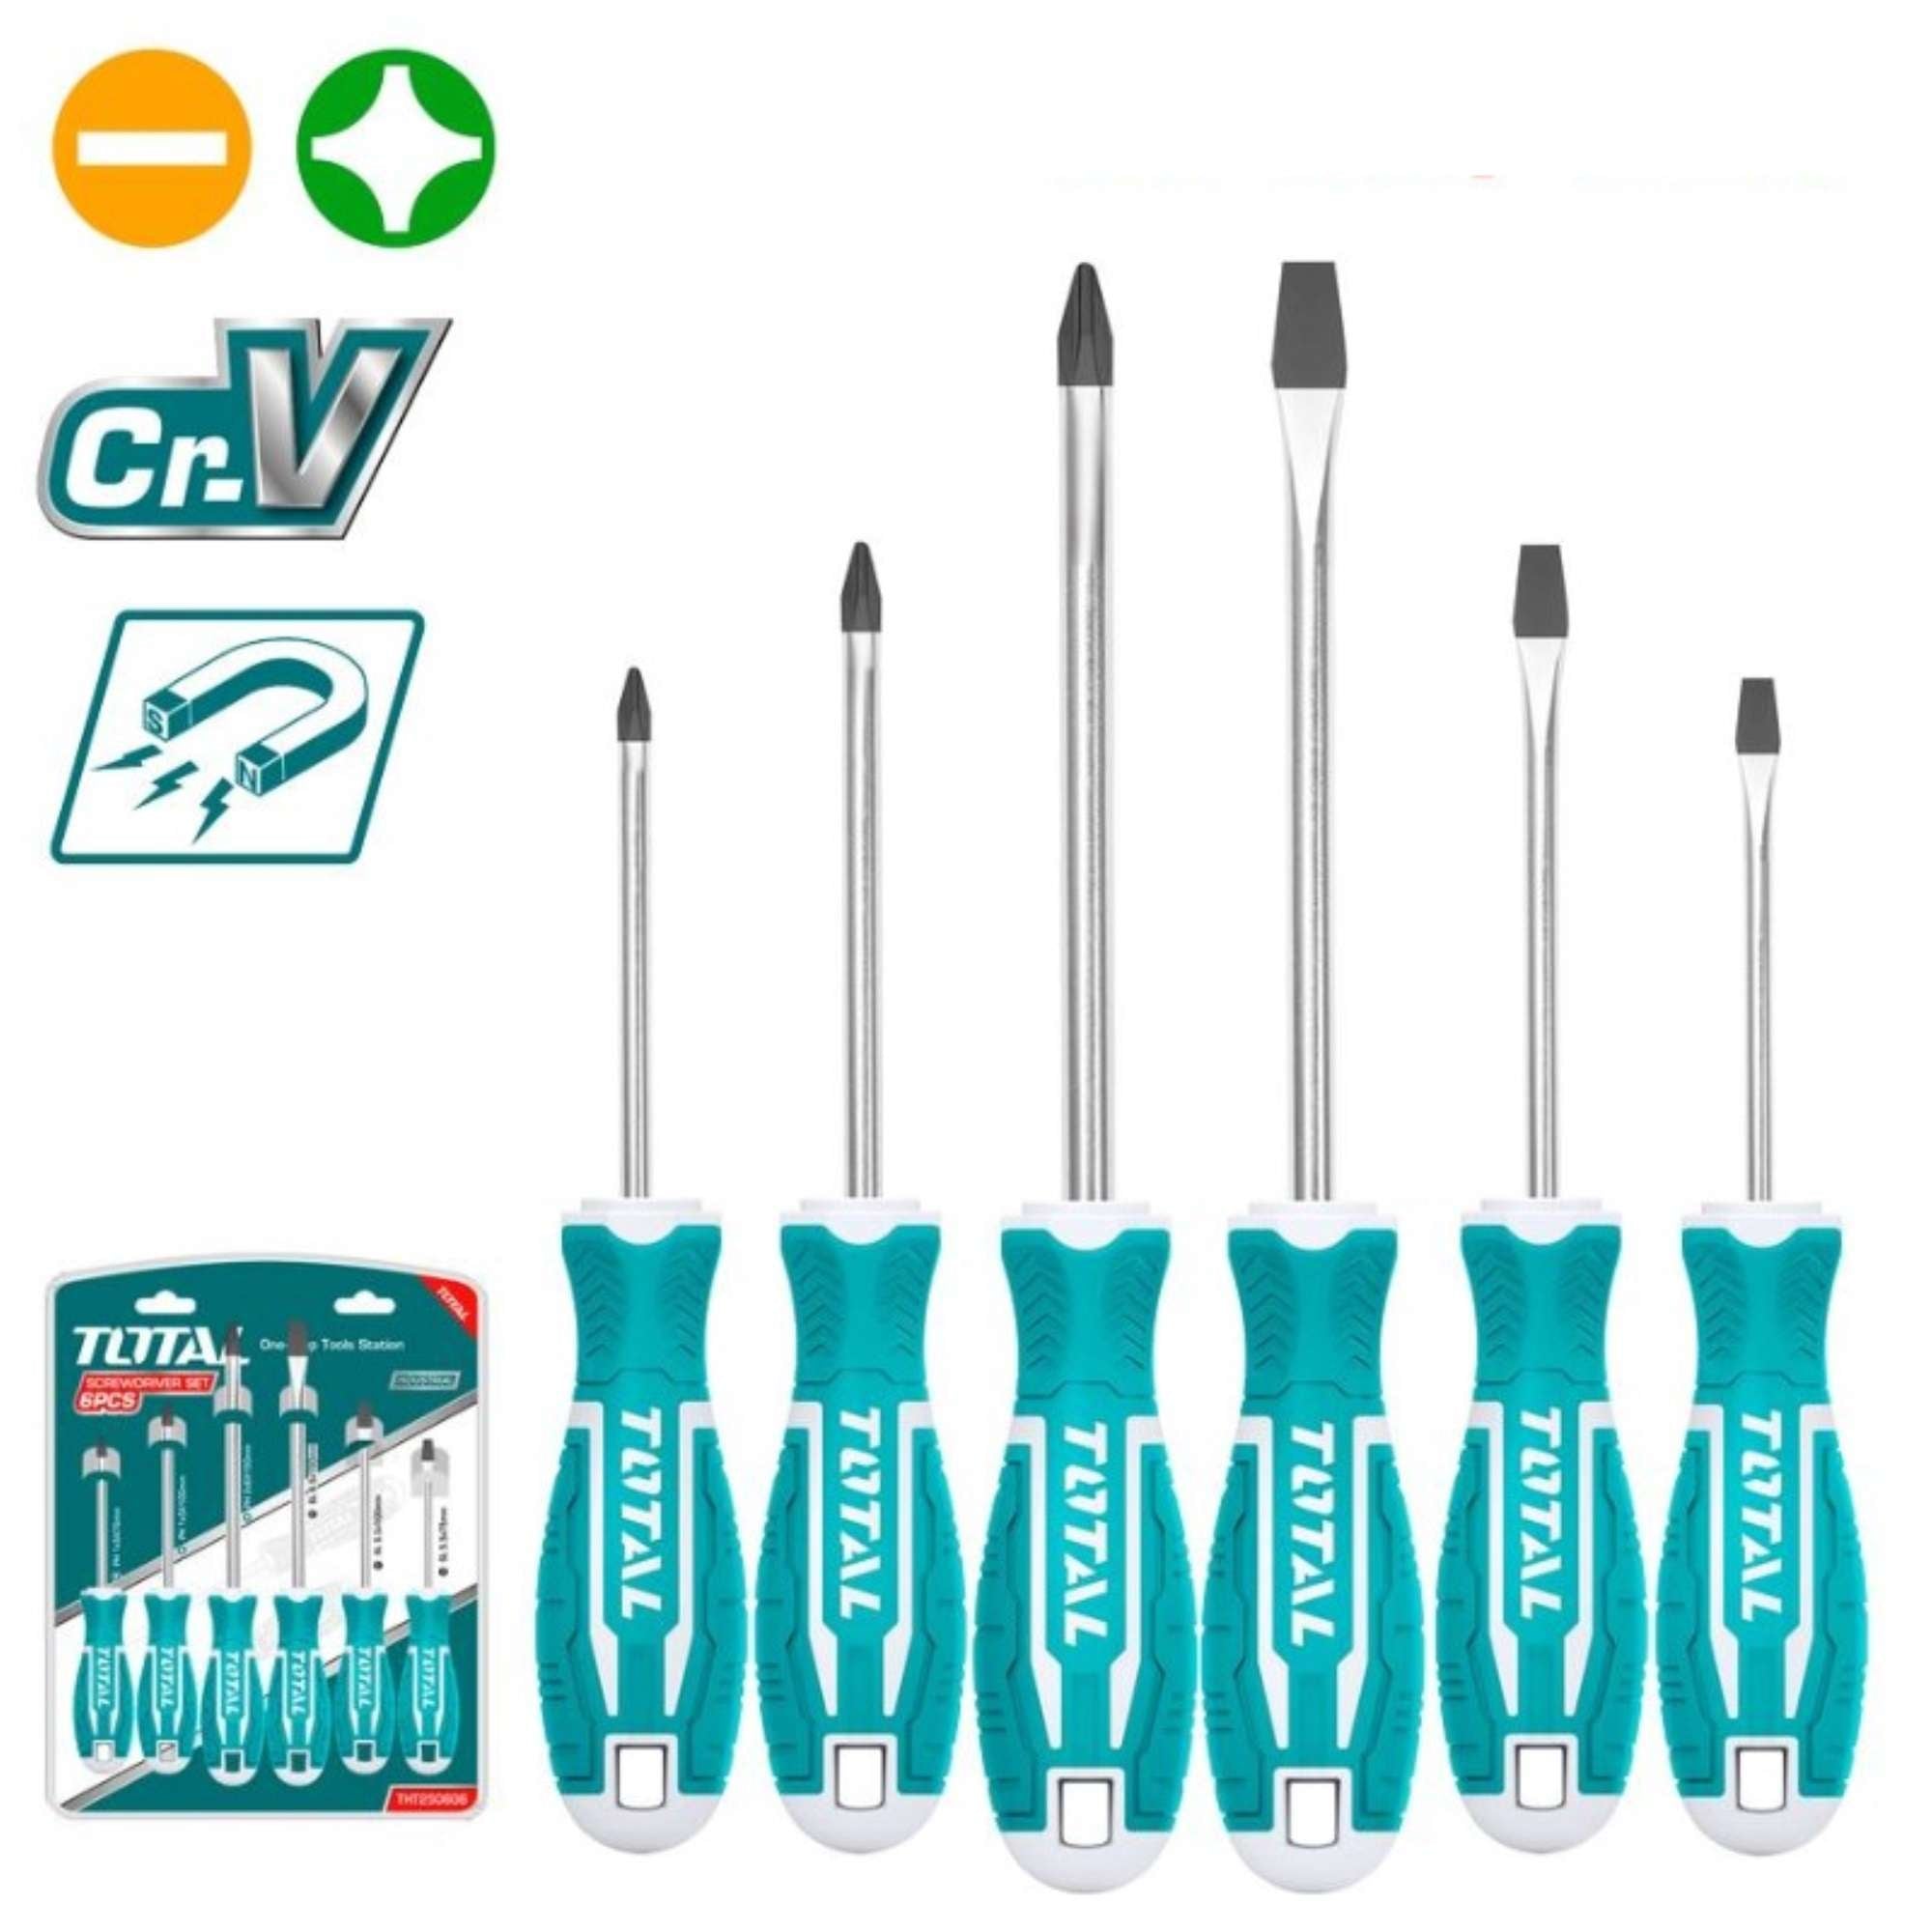 Set 6 Professional Screwdrivers with cross/hole - Total 4181400006